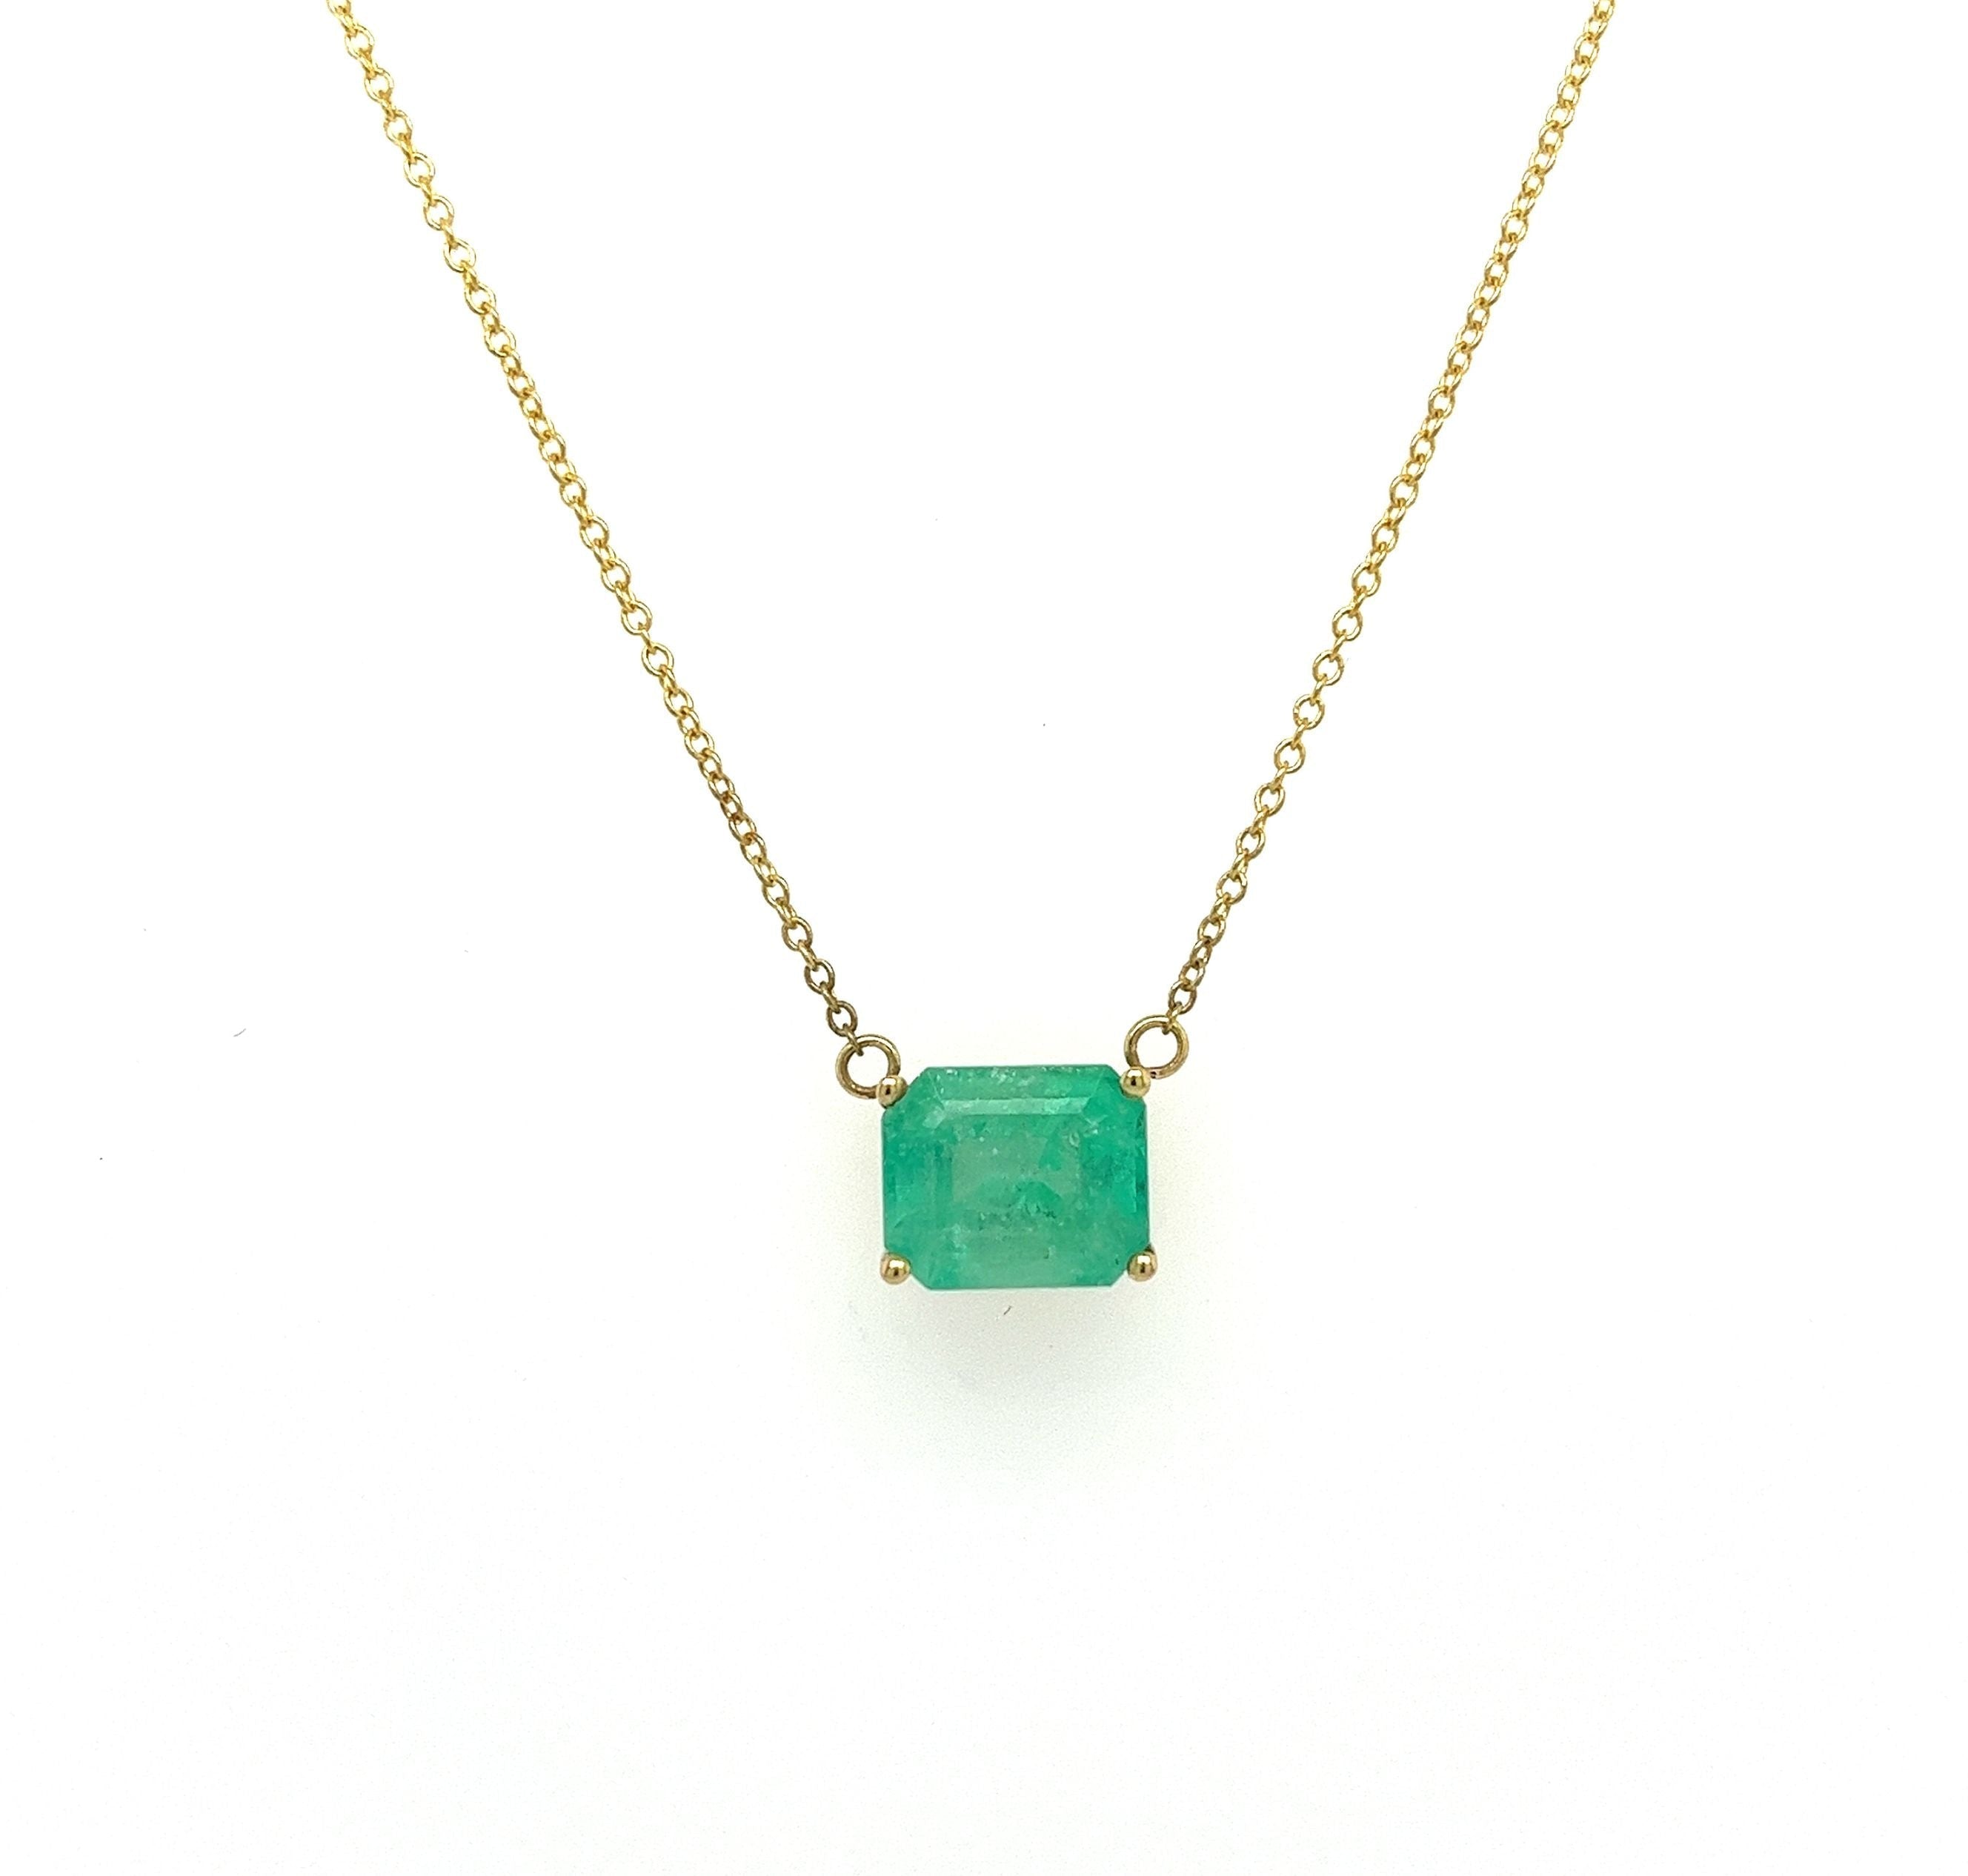 3_66-Carat-Emerald-Cut-Colombian-Emerald-Solitaire-East-West-Pendant-Necklace-in-14K-Yellow-Gold-Necklace.jpg